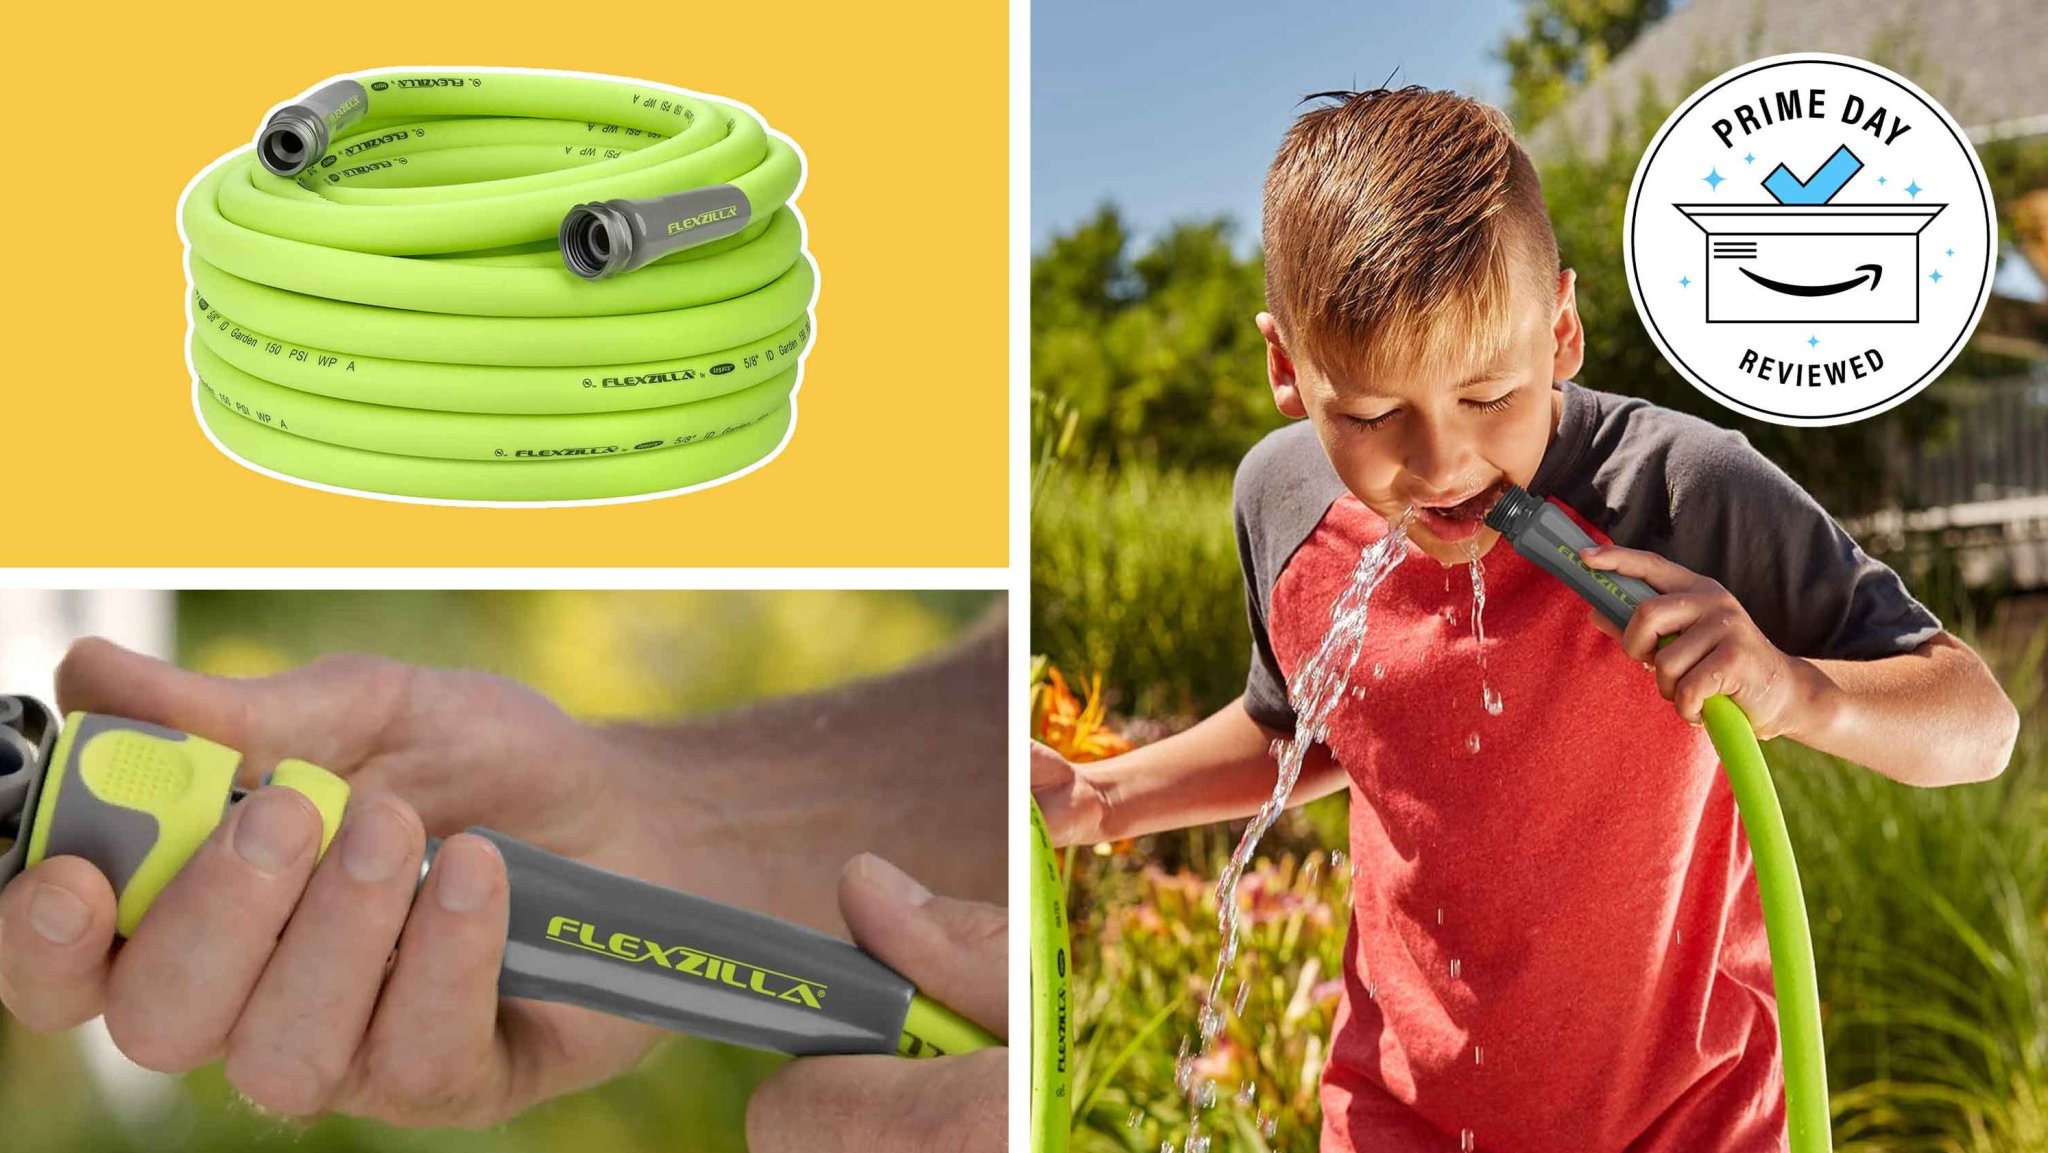 Save 49% on our favorite garden hose ahead of Amazon Prime Day